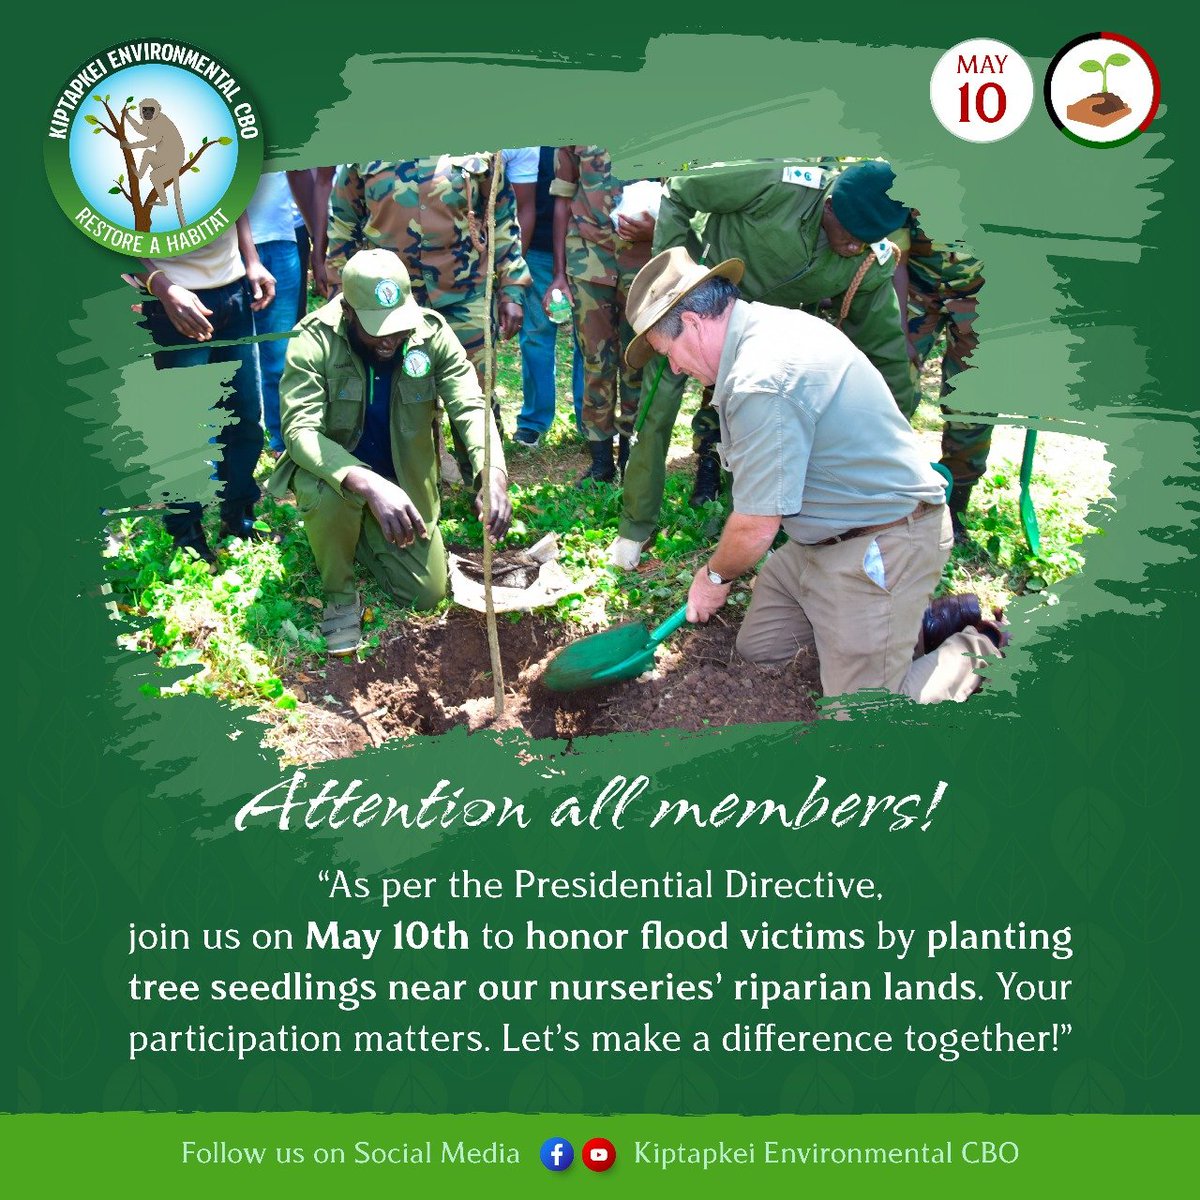 Tomorrow we shall plant trees across our tree nurseries in honour of the victims of the floods that ravaged our motherland & for the mitigation of climate change. Plant a tree with us! @kiptapkei #ClimateActionNow